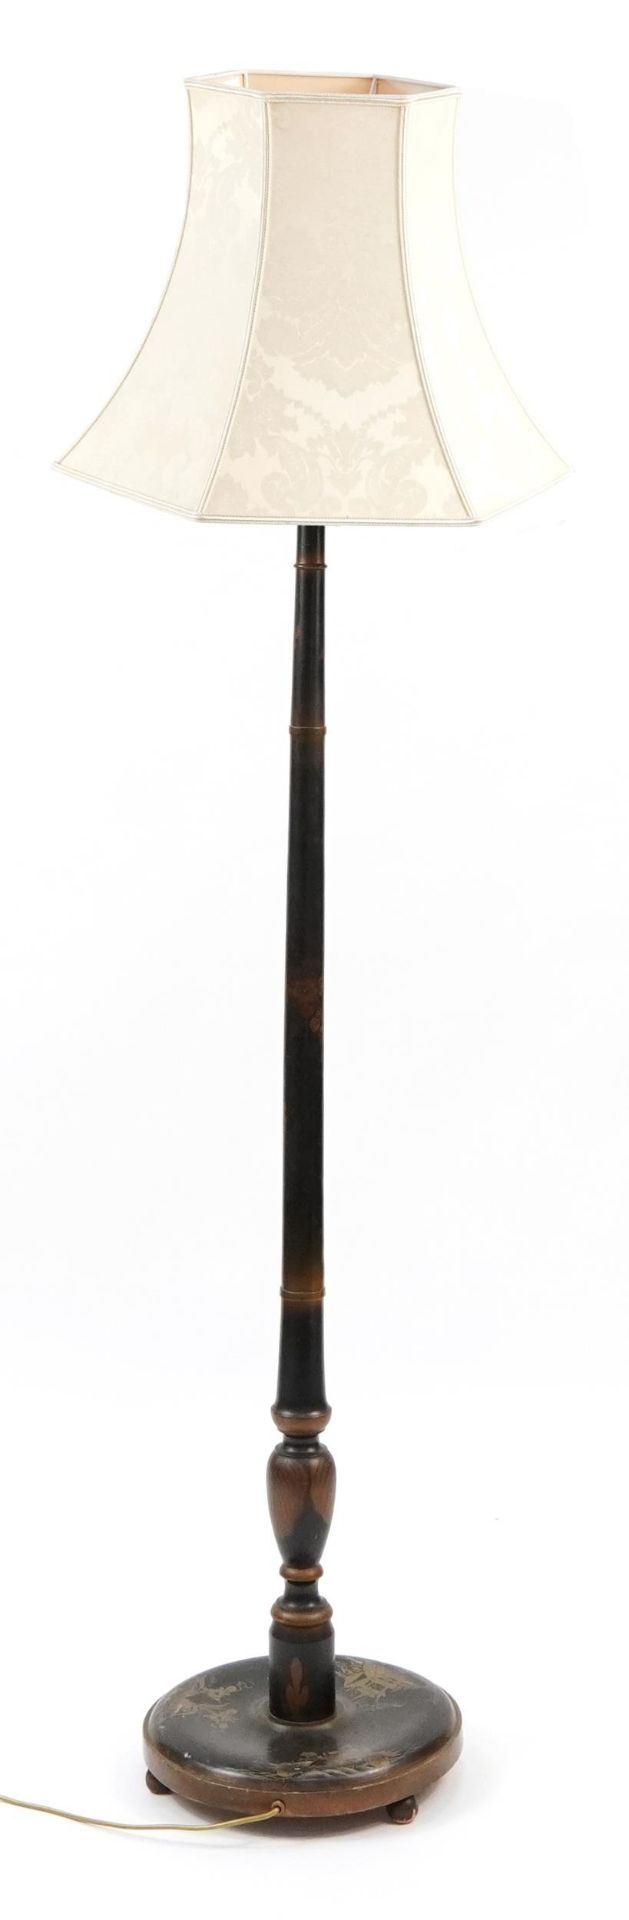 Chinese black lacquered chinoiserie standard lamp with shade, 175cm high - Image 2 of 2